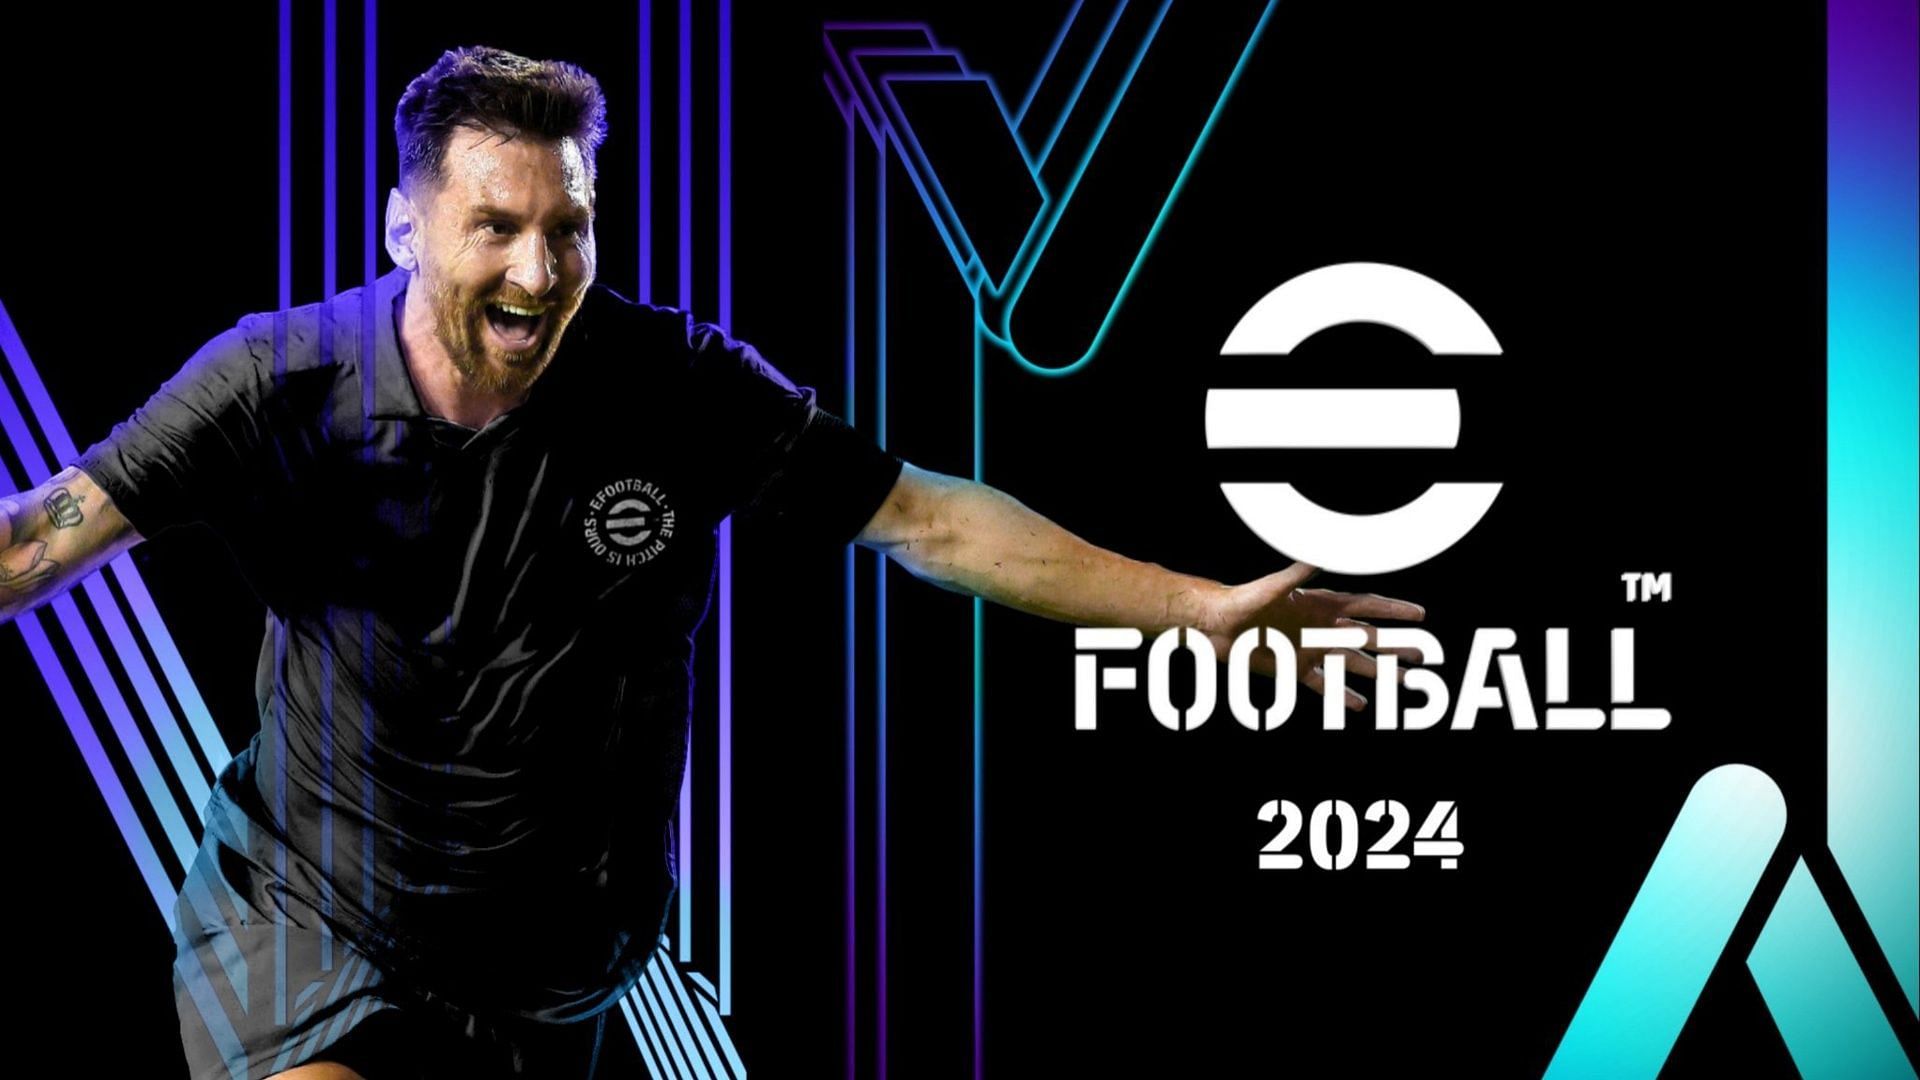 eFootball™ 2024 - Download